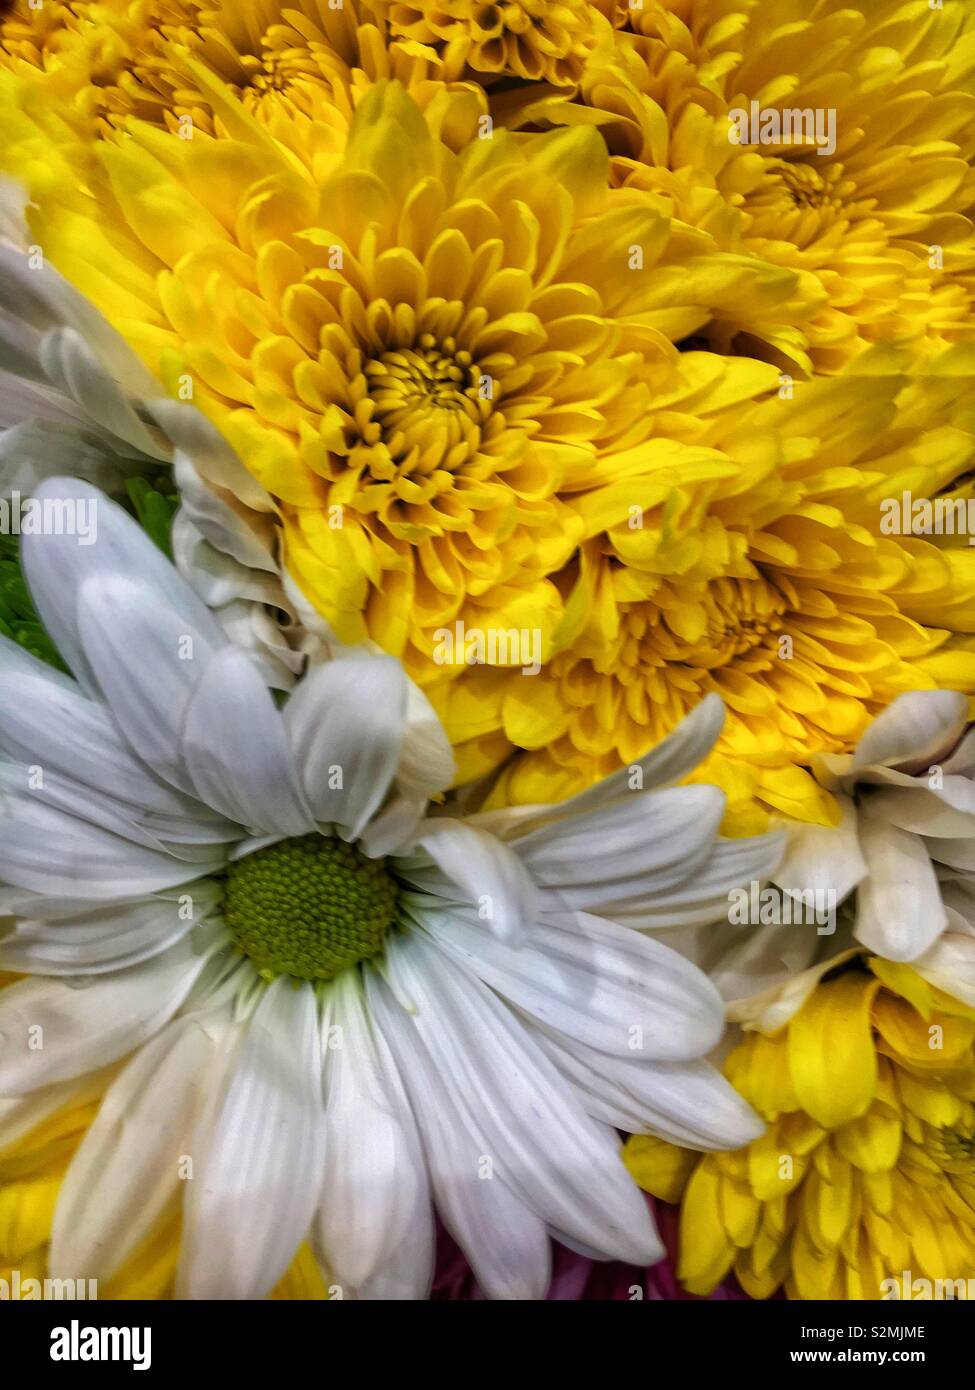 Full frame of a spring flower bouquet of perfect fresh yellow chrysanthemums and a white daisy. Stock Photo